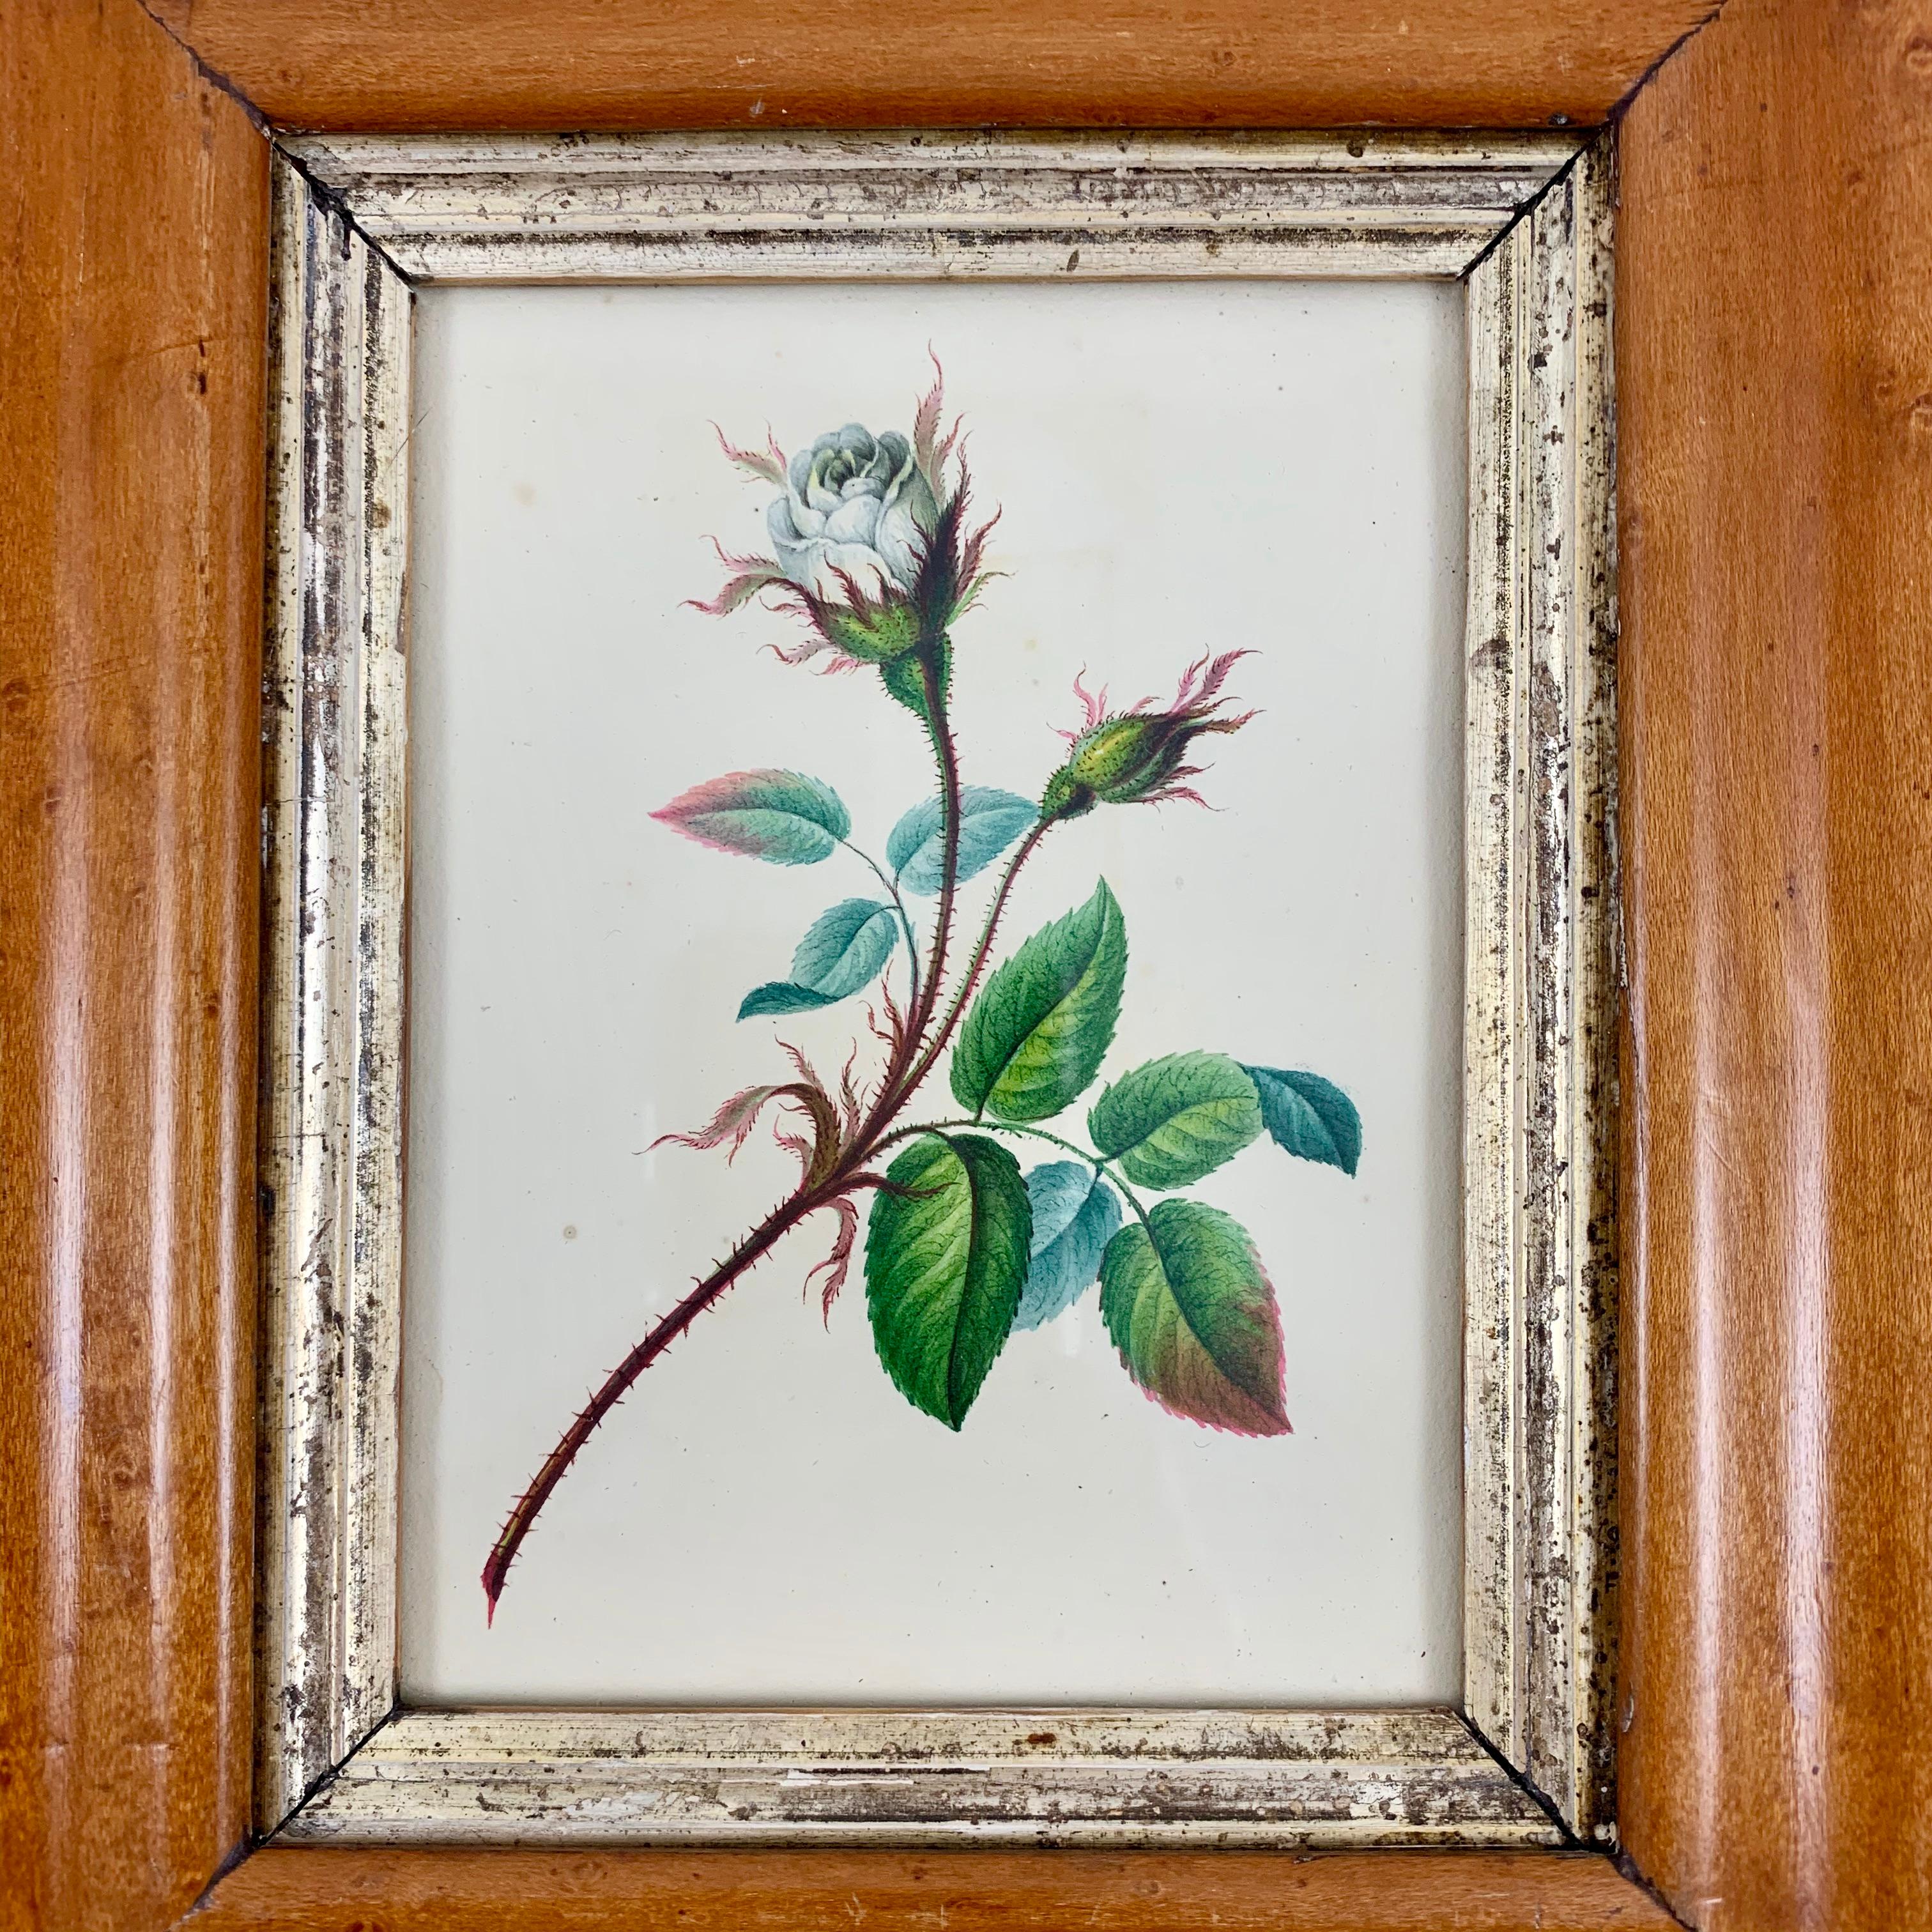 An original British School Regency Period watercolor, circa 1780-1835, mounted in a Georgian Period fruitwood frame. These watercolors were largely painted by young girls from aristocratic families during the Jane Austen period. The arts of painting